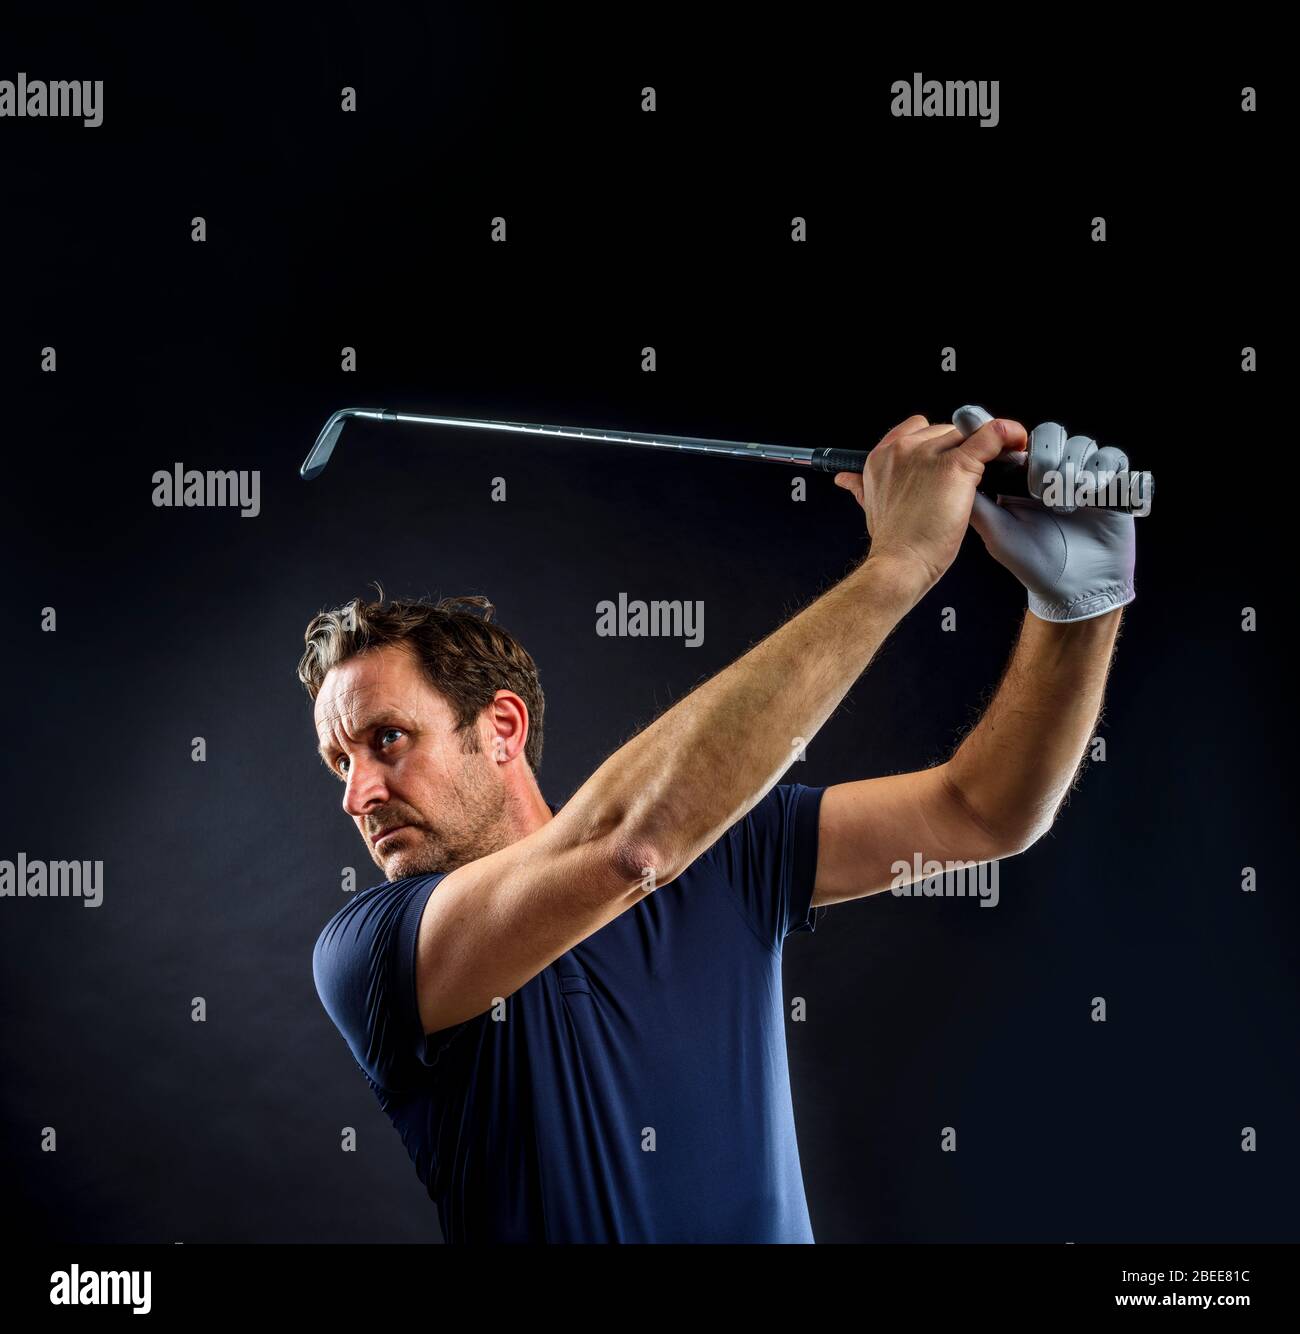 Close-up of a golf player intent on perfecting the swing isolated on black background Stock Photo